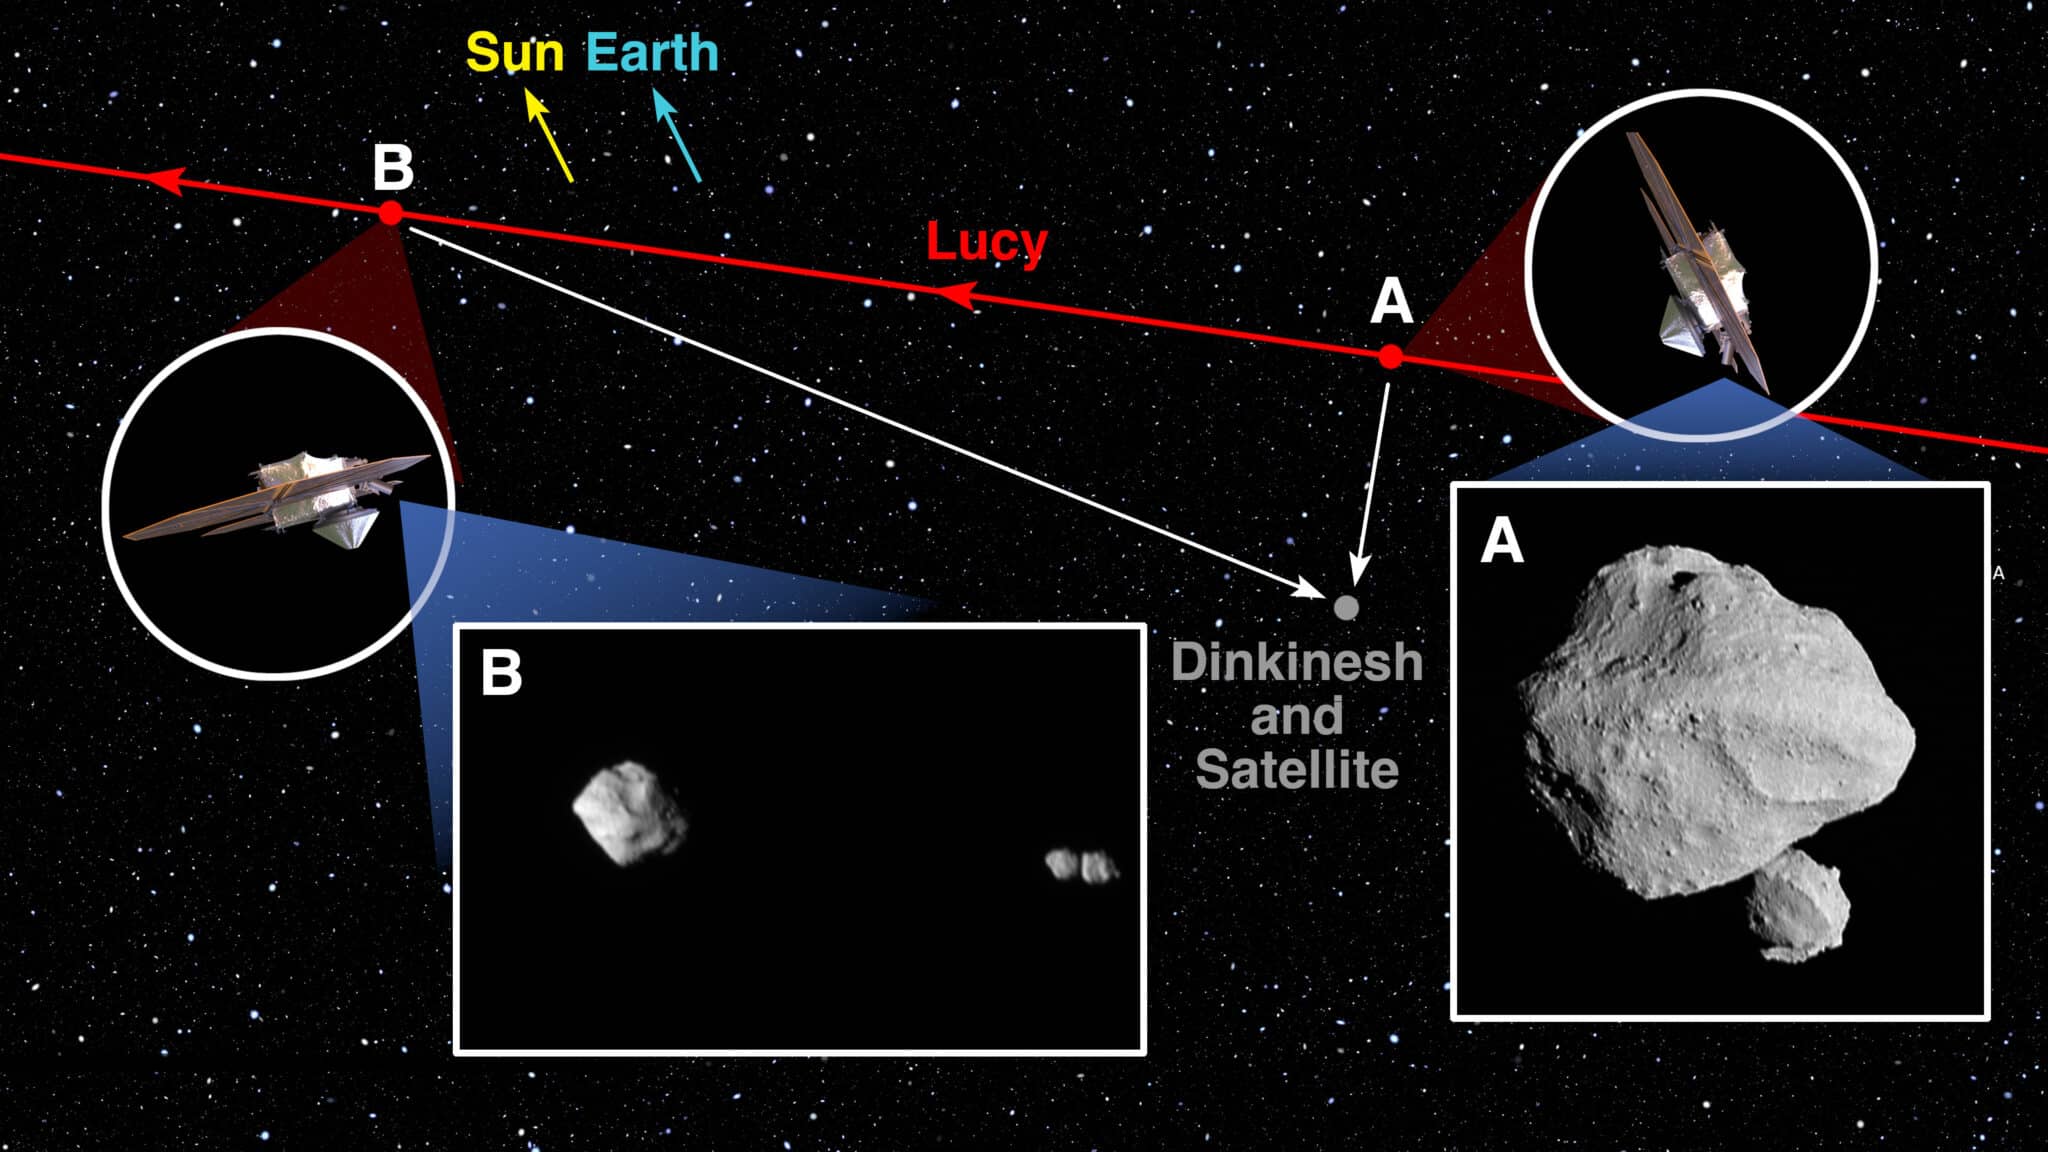 This diagram shows the trajectory of the NASA Lucy spacecraft (red) during its flyby of the asteroid Dinkinesh and its satellite (gray).